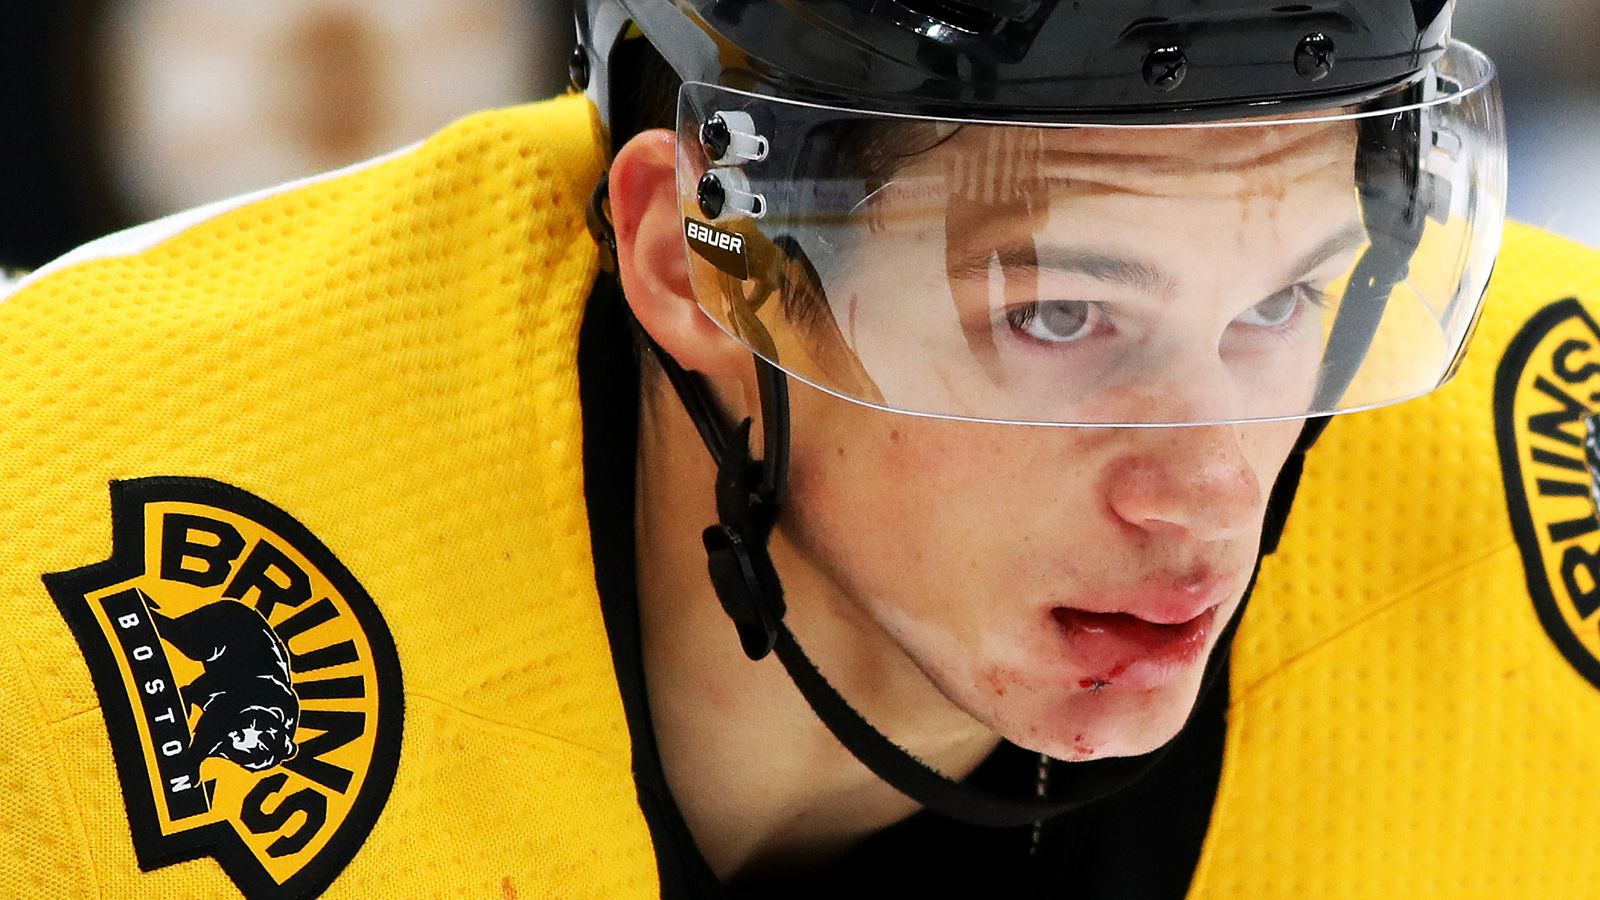 Jack Hughes embracing weekend as NHL's youngest All-Star